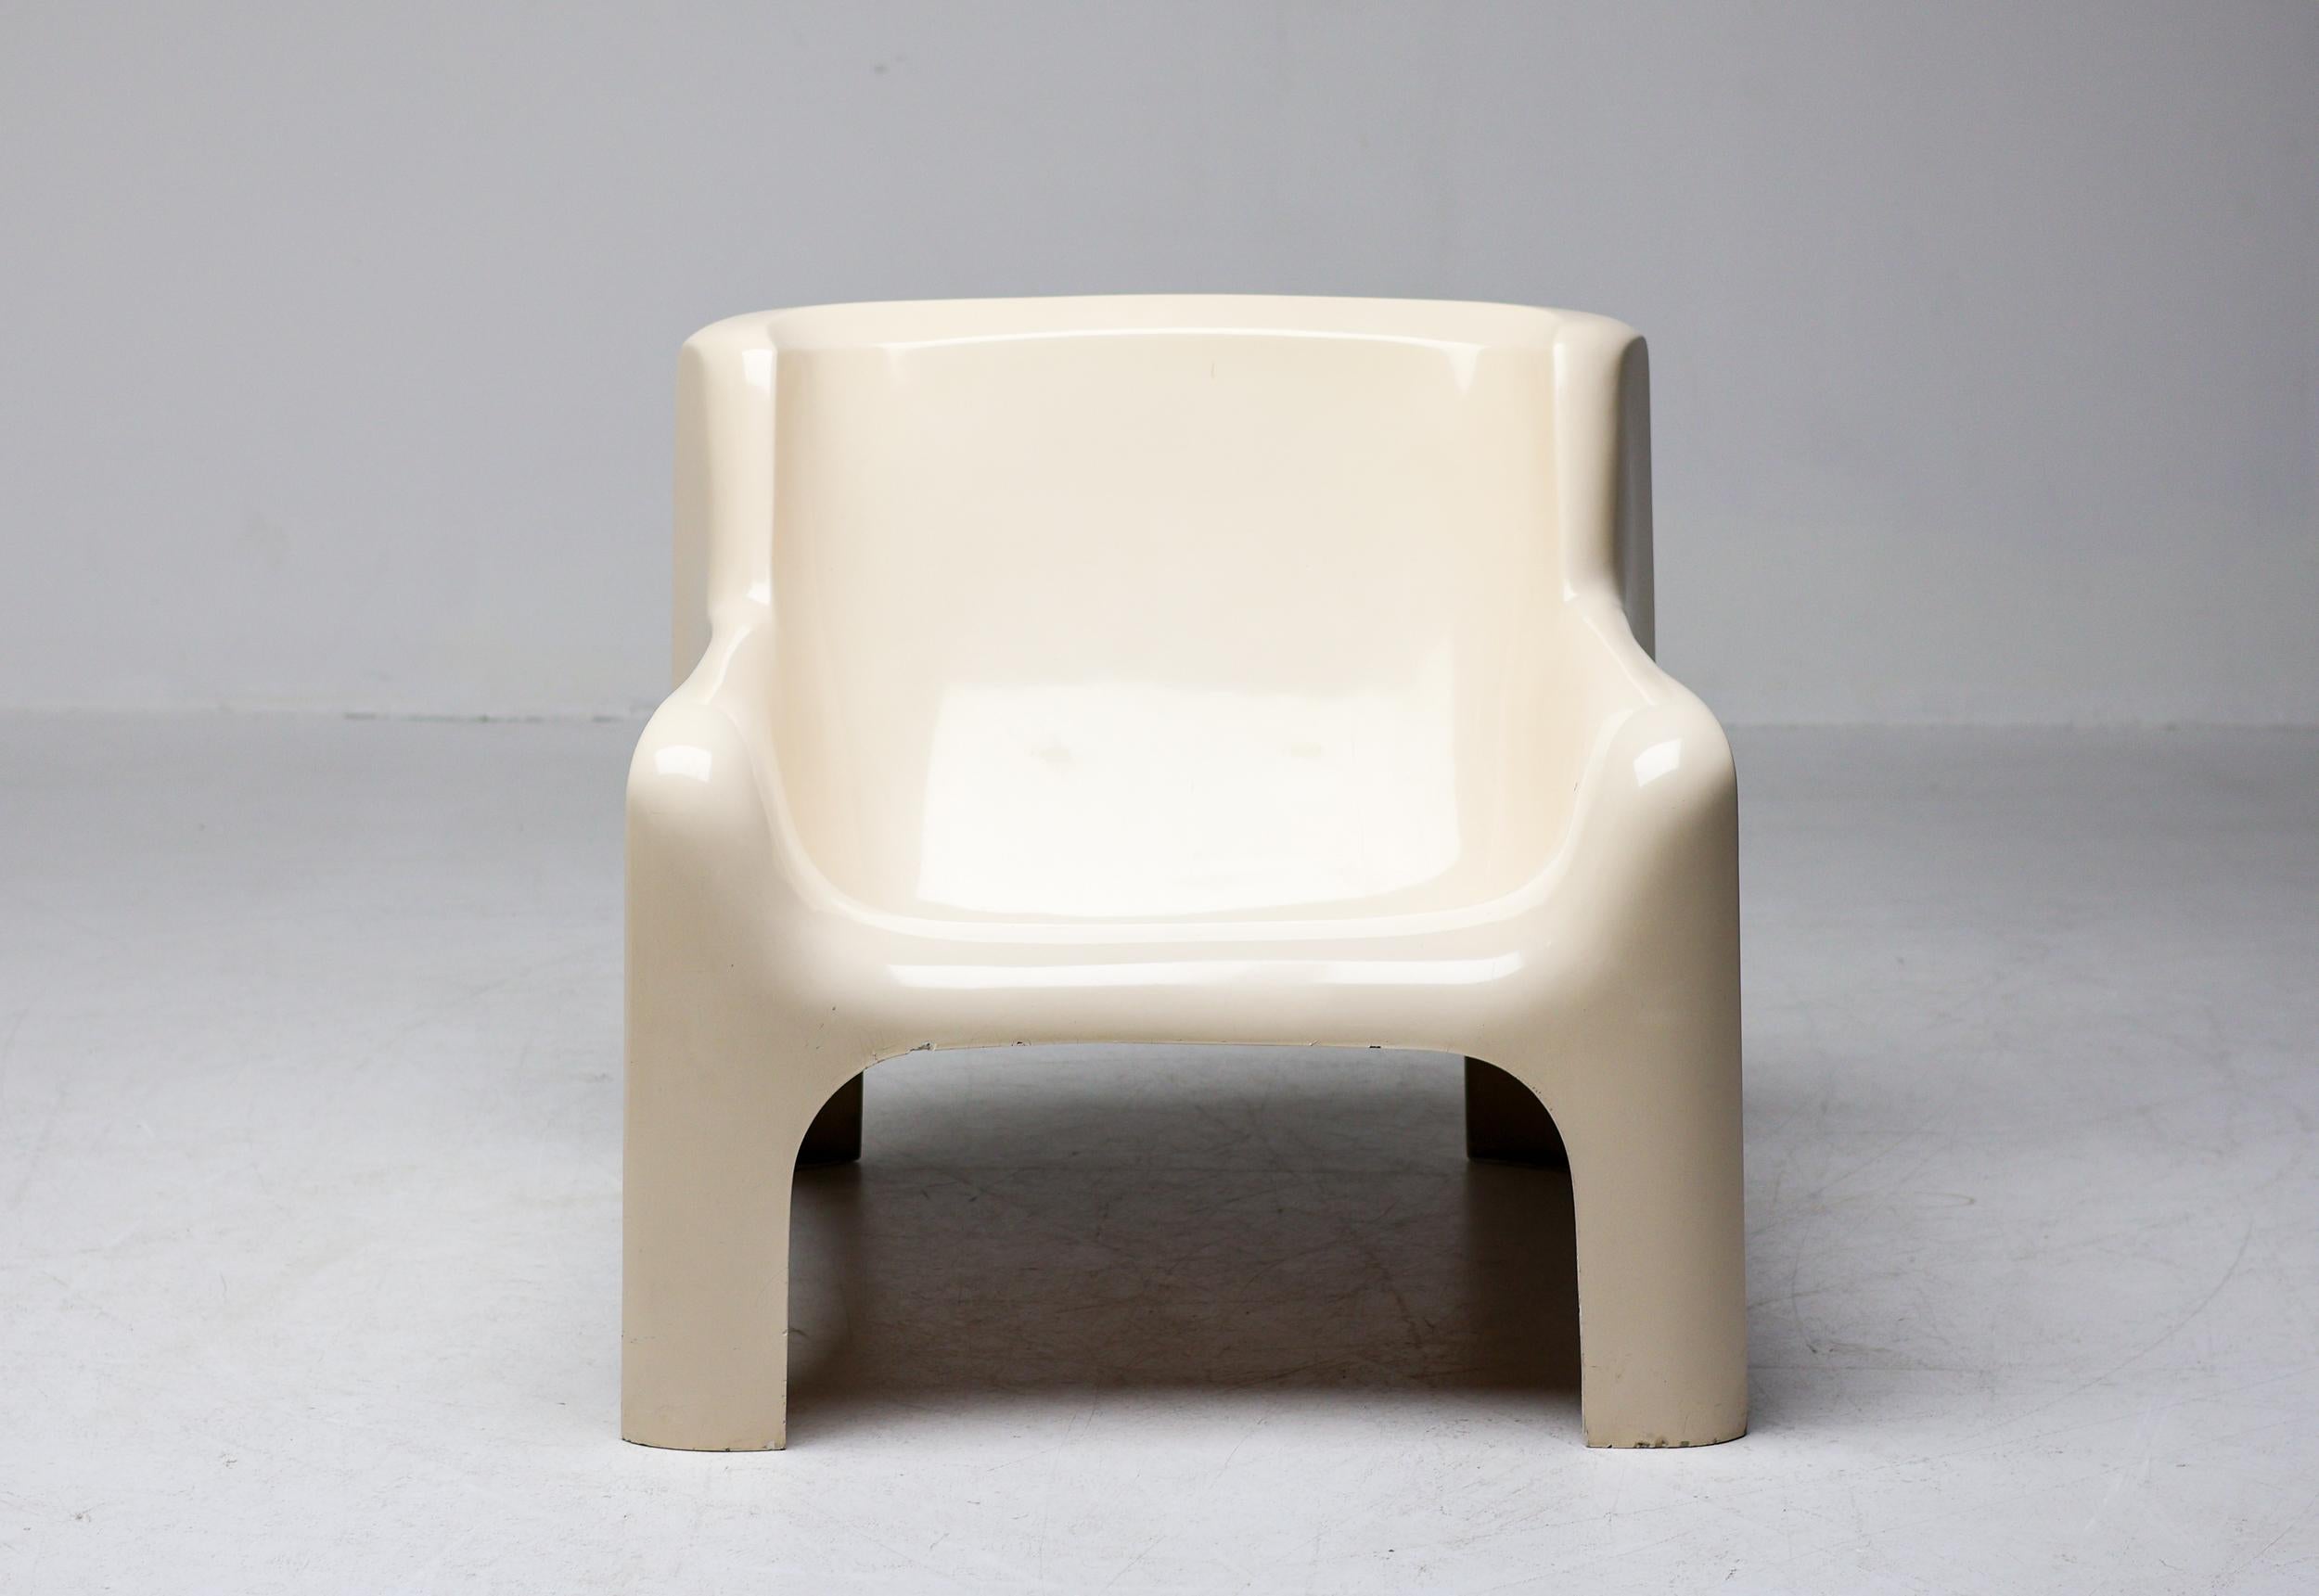 Carlo Bartoli Solar Lounge Chair in Fiberglass made by Arflex in 1967.
Fiberglass and polyester resin with lacquer finish.
An identical example is included in the permanent collection of the MoMA in New York.
Fine all original condition with some